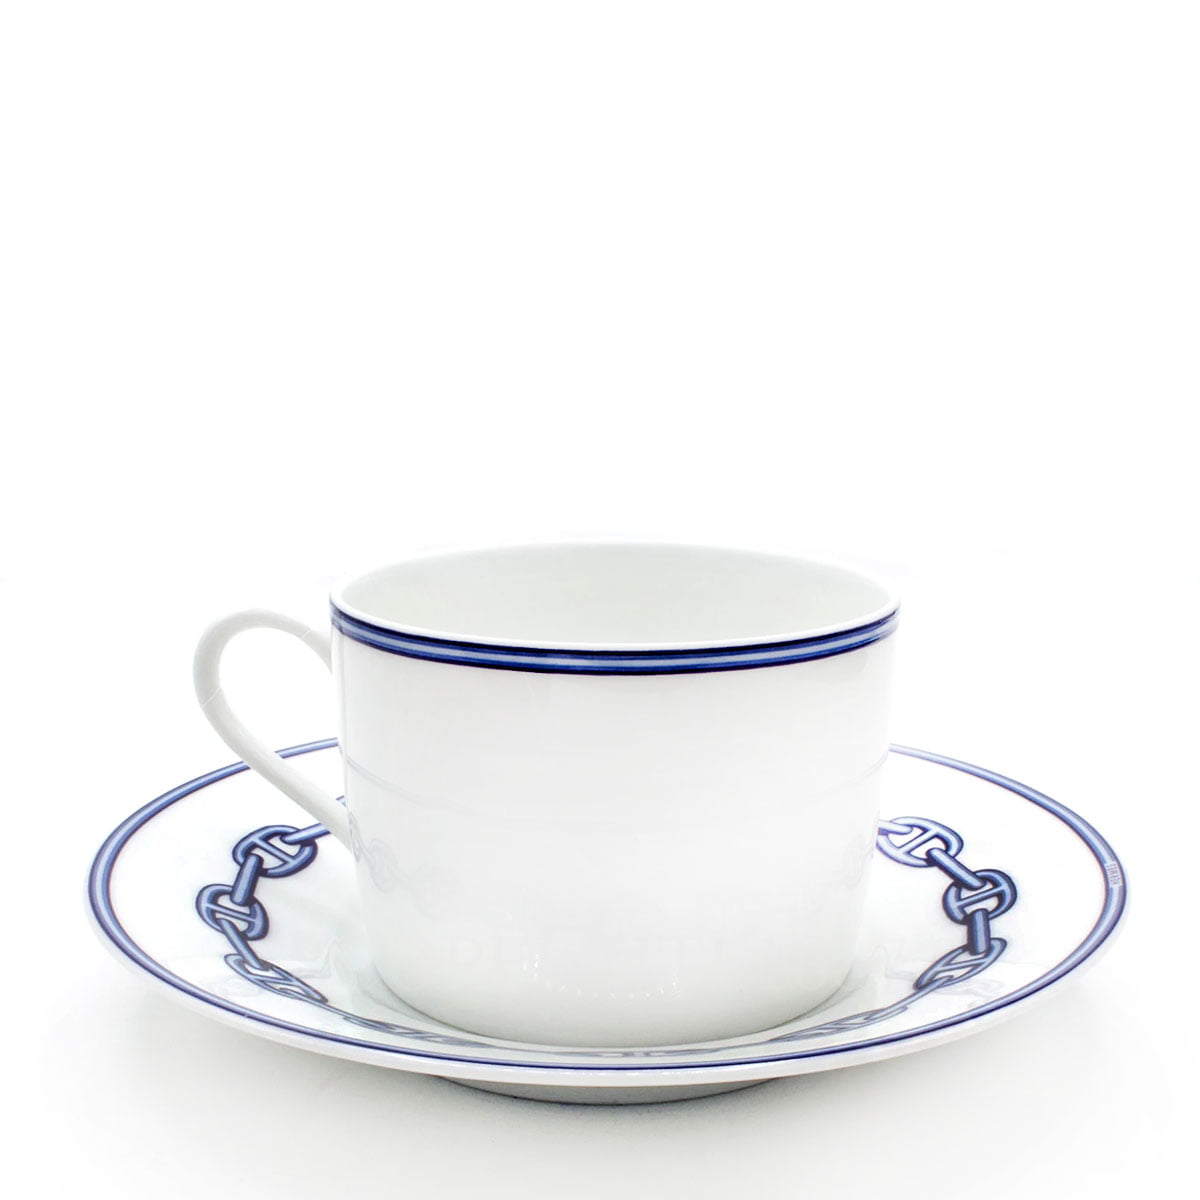 Hermes 2 Tea Cup and Saucer Chaine d'ancre bleu Gift Set